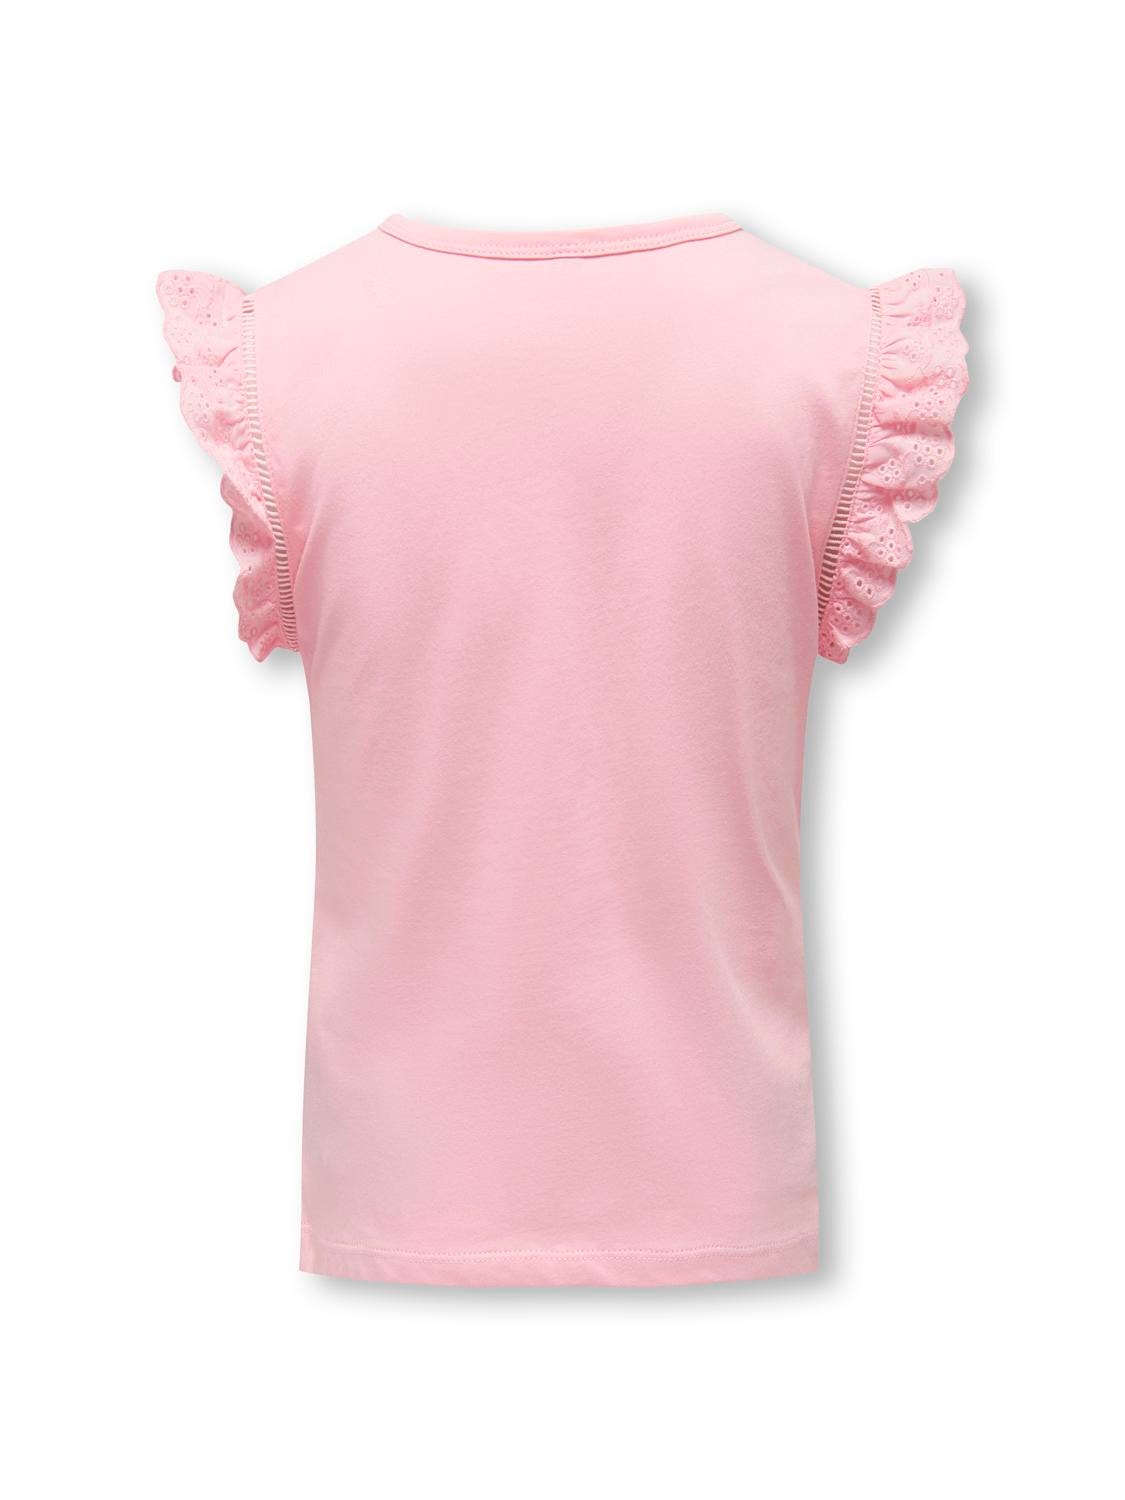 ONLY O-Neck Top With Frills -Tickled Pink - 15291522